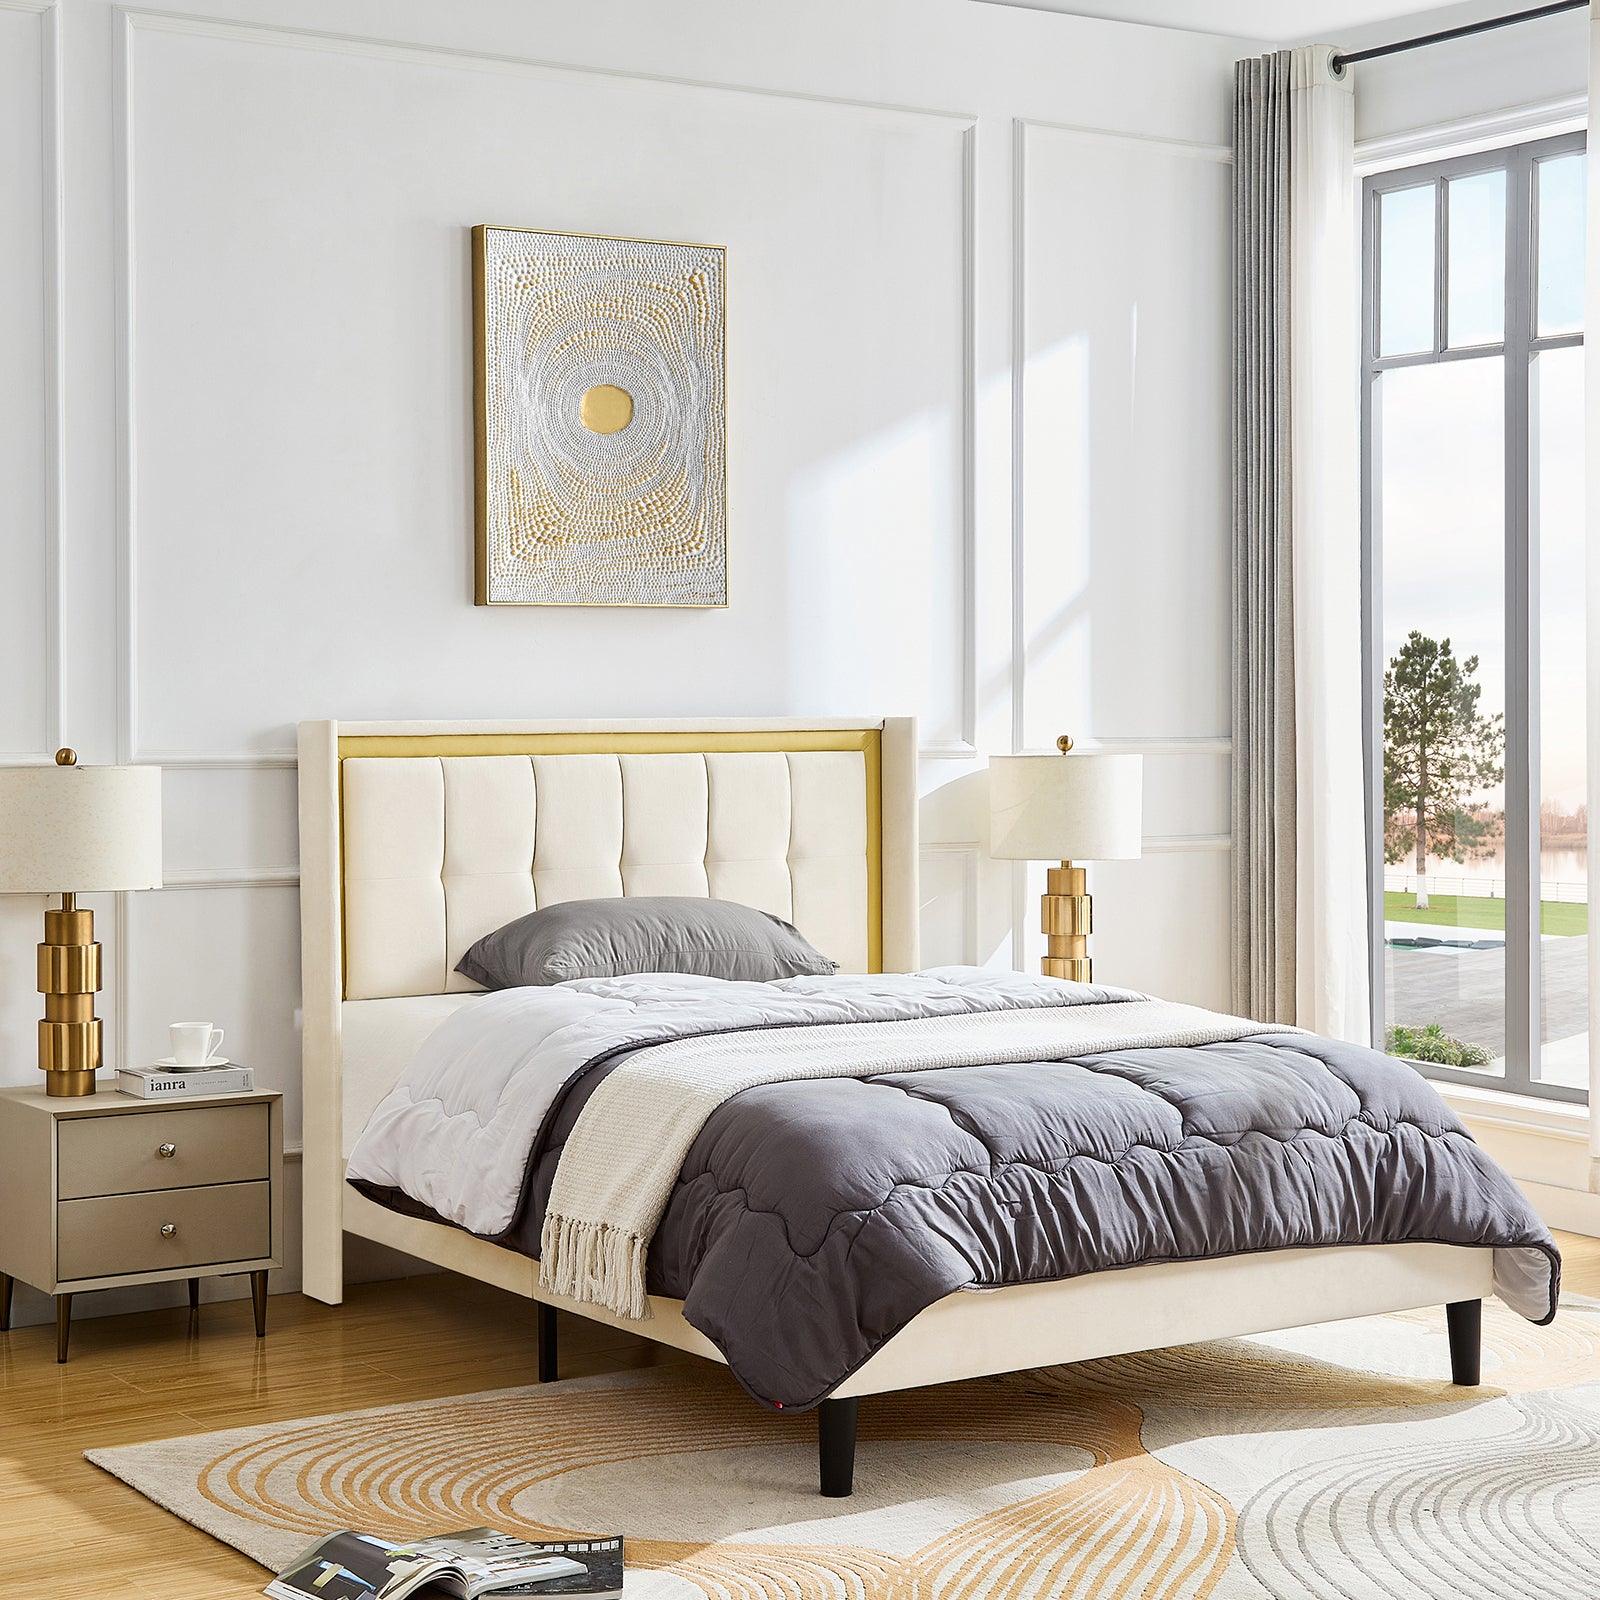 🆓🚛 Queen Size Upholstered Bed With Headboard, Sturdy Wooden Slats, High Load-Bearing Capacity, Non-Slip and Noiseless, No Springs, Easy To Assemble, Beige